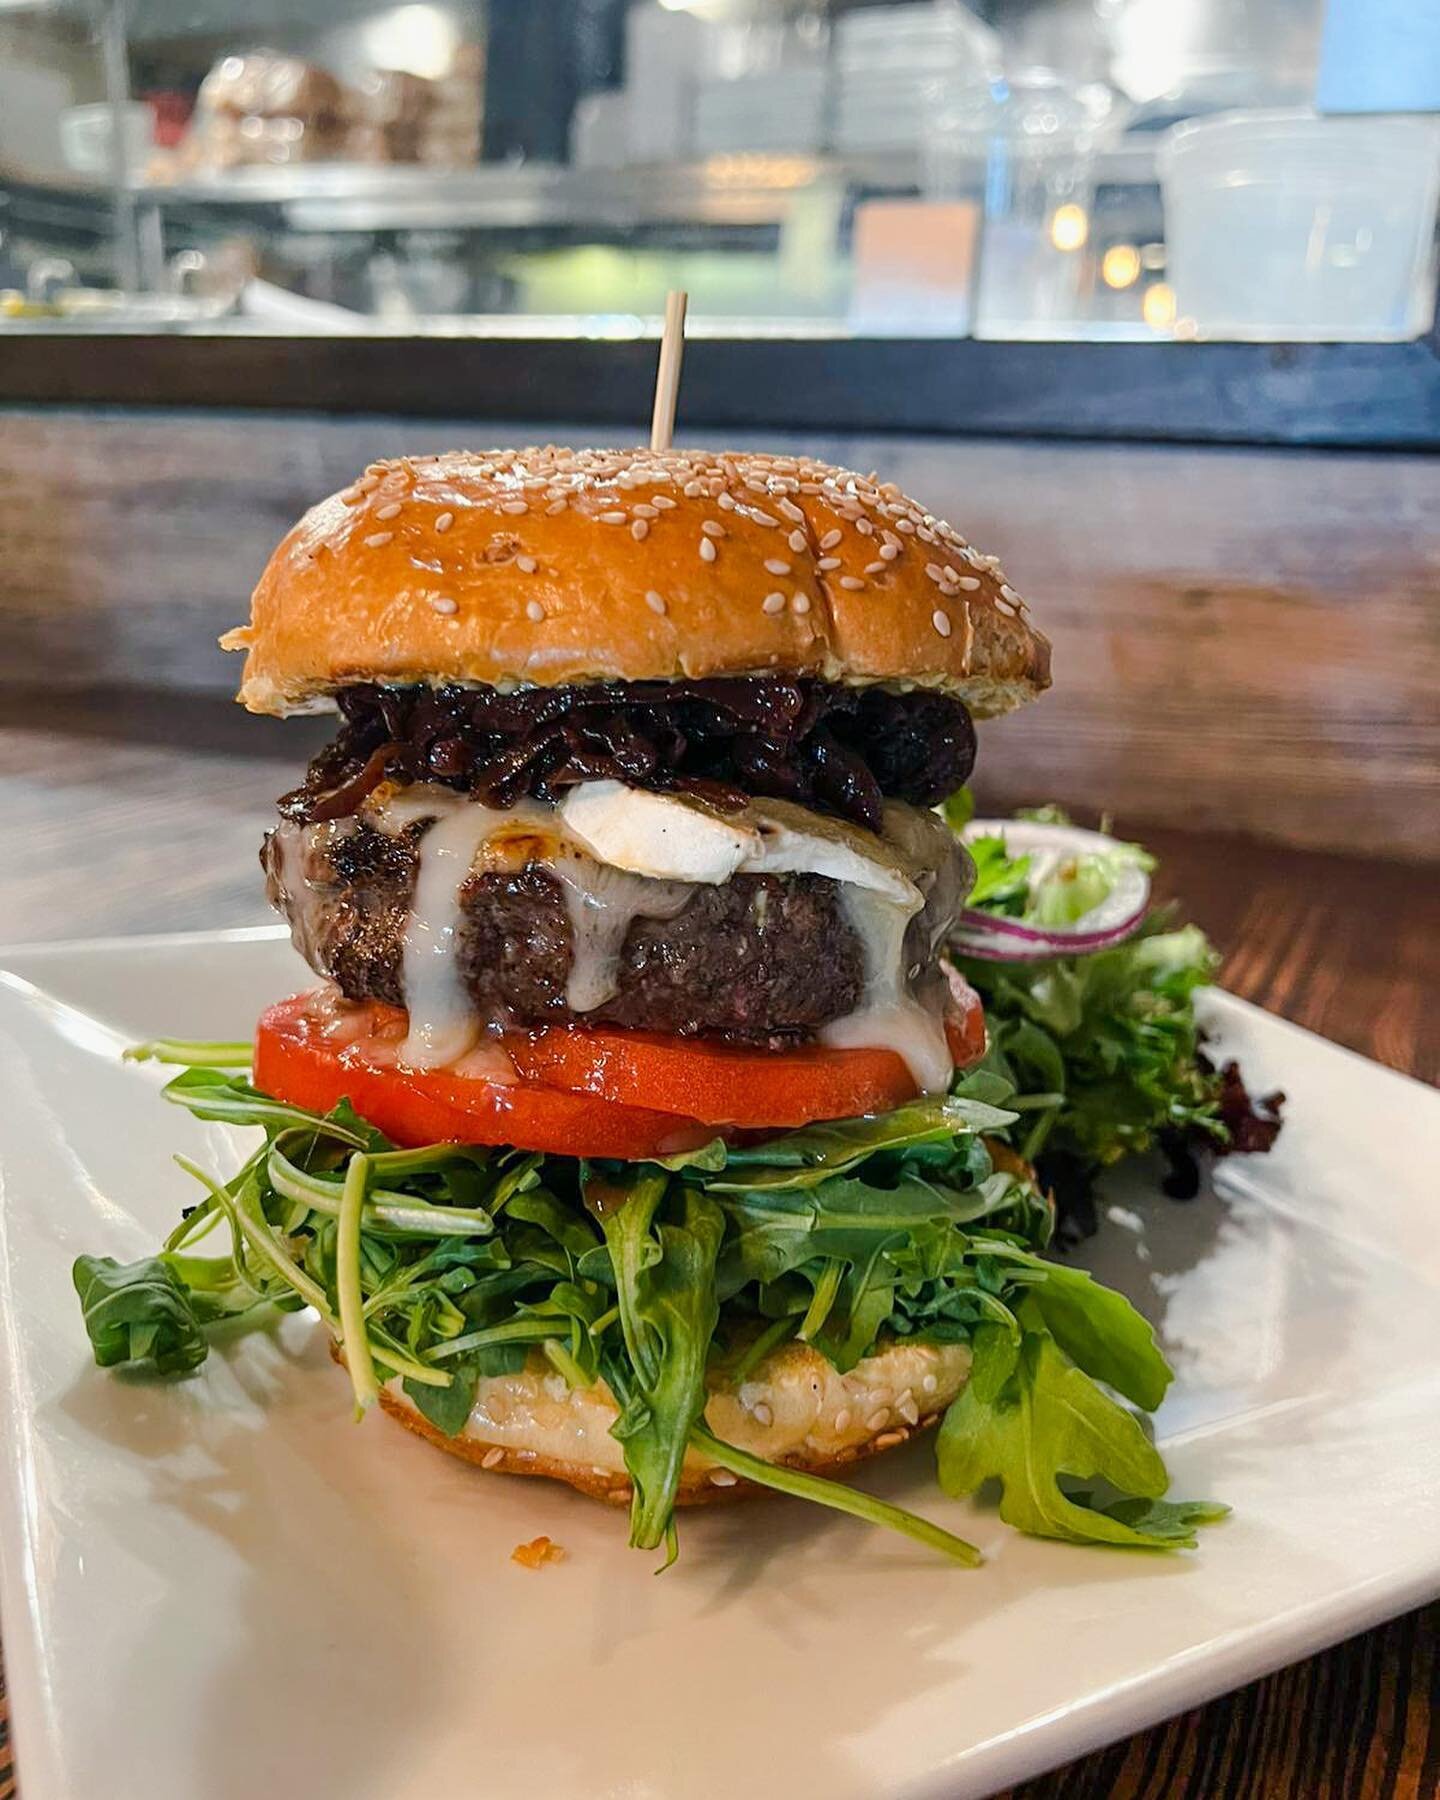 BIG FRIDAY &ldquo;THE FRENCHIE&rdquo; BURGER

A perfectly grilled 8oz Patty with melted brie, onion confit, pecan smoked bacon, arugula, tomatoes, and dijon mustard on a toasted sesame bun.

#whiskgourmet #miamifoodiesofinstagram #beerandburger #sout